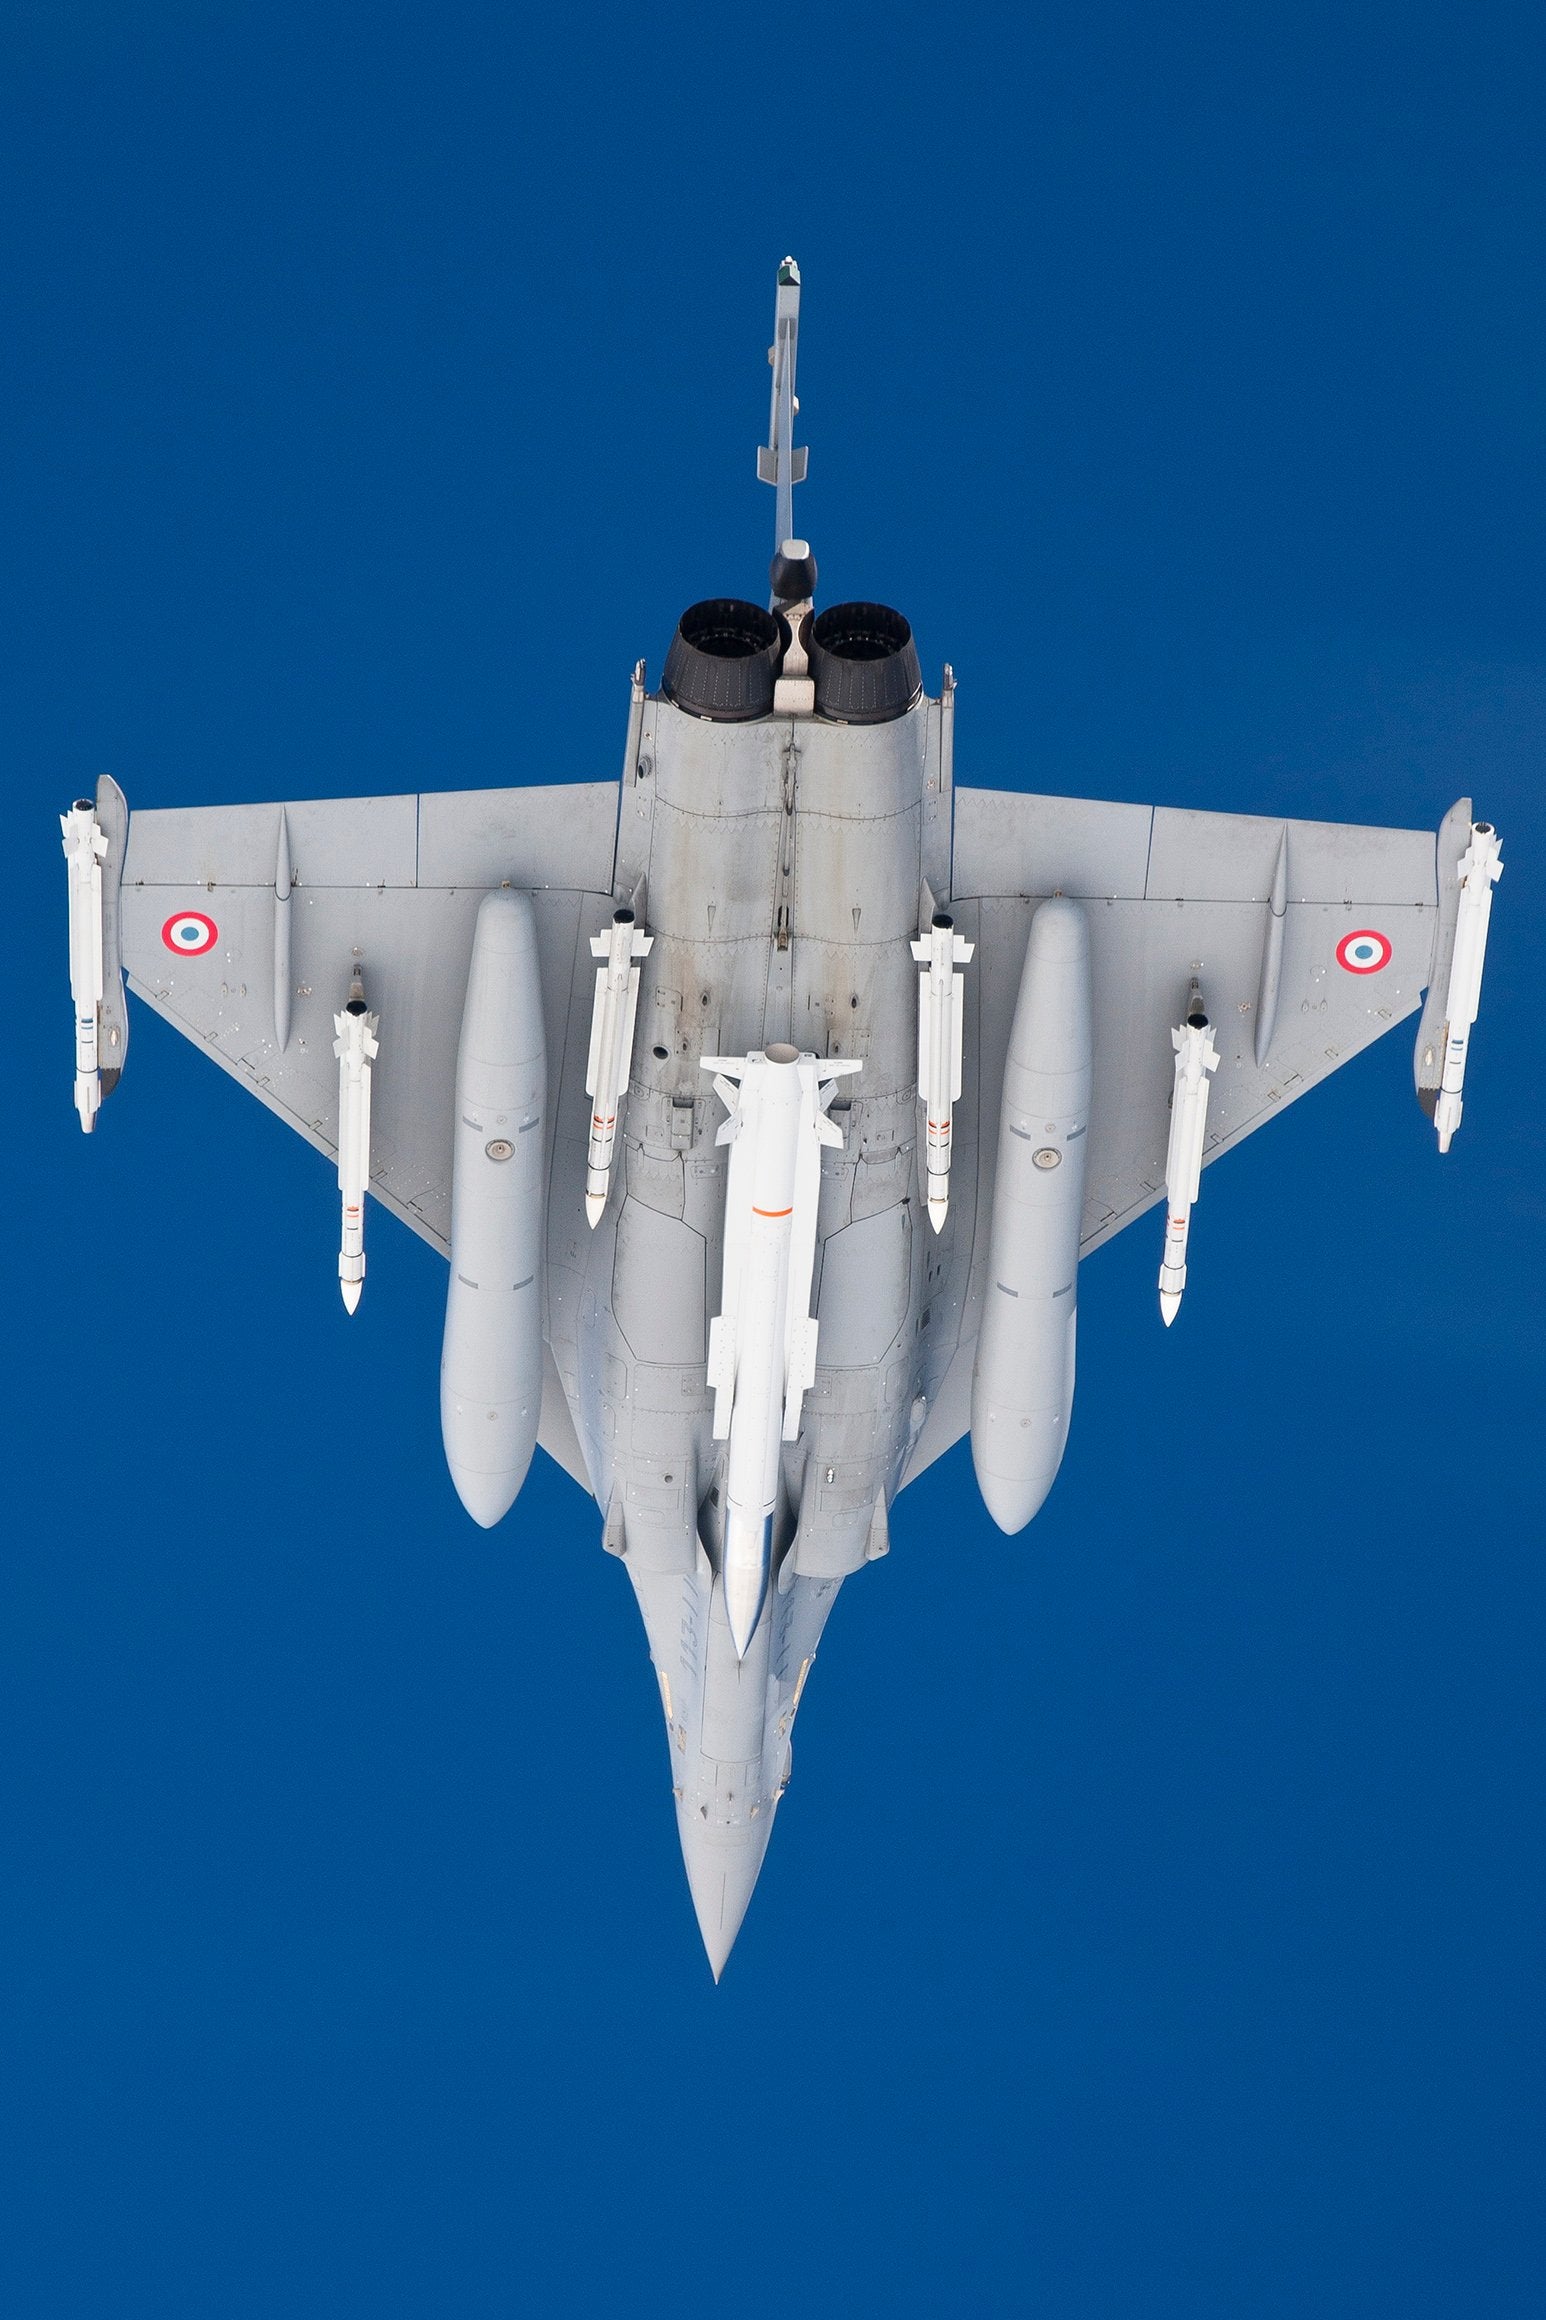 rafale-carrying-the-asmpa-nuclear-missile-v0-ipypdsc4mq0a1.jpg